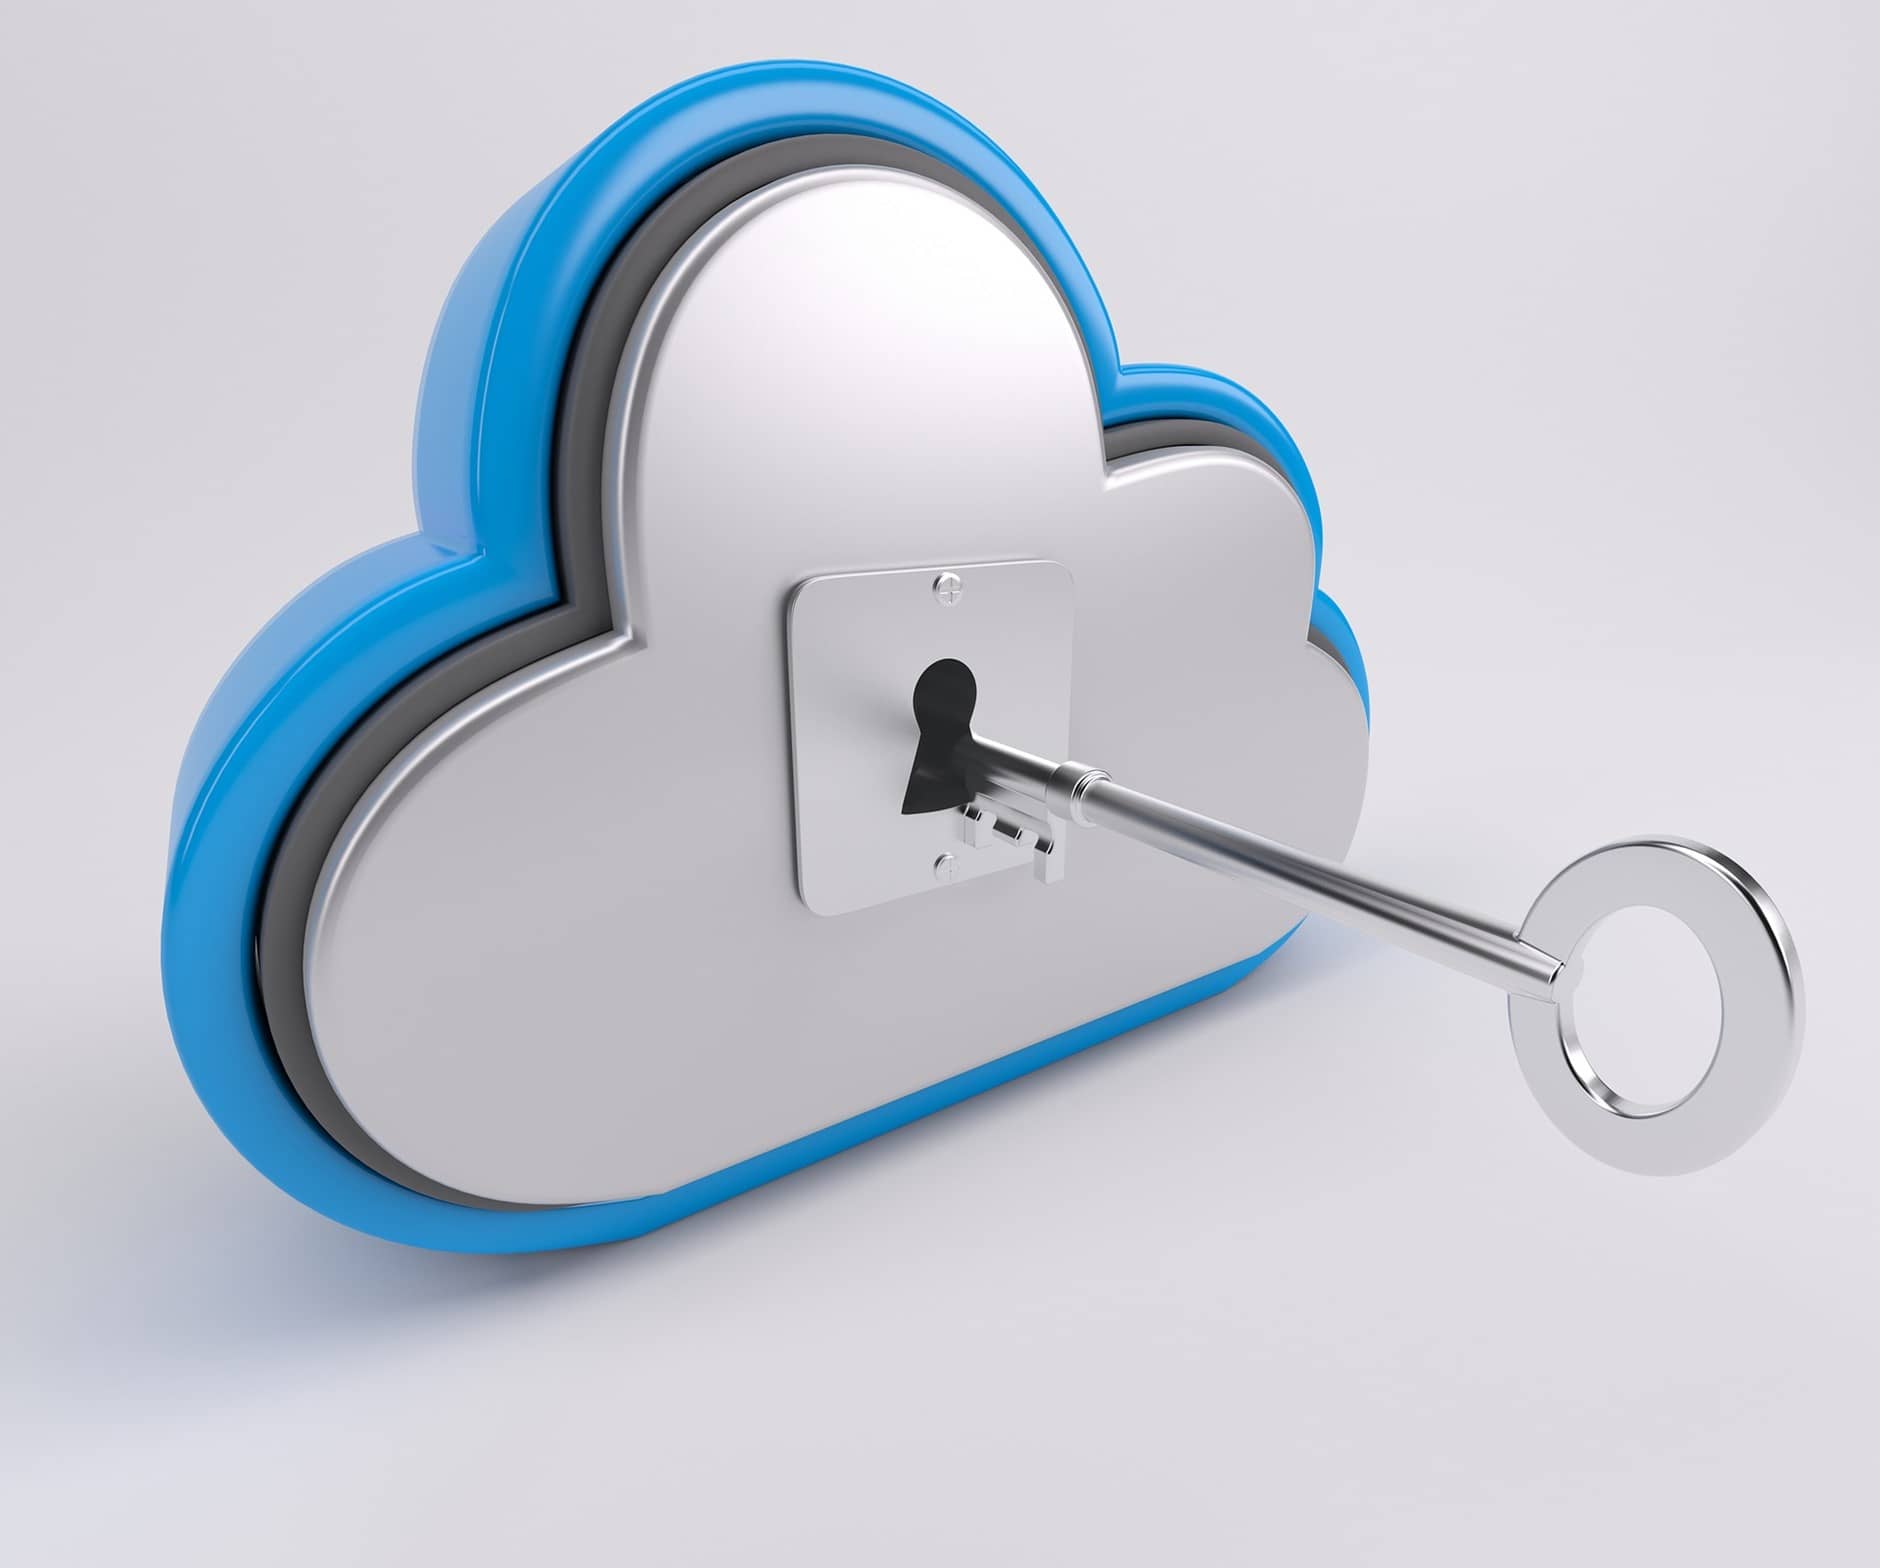 6 Ways to Prevent Misconfiguration and Avoid Cloud Breaches